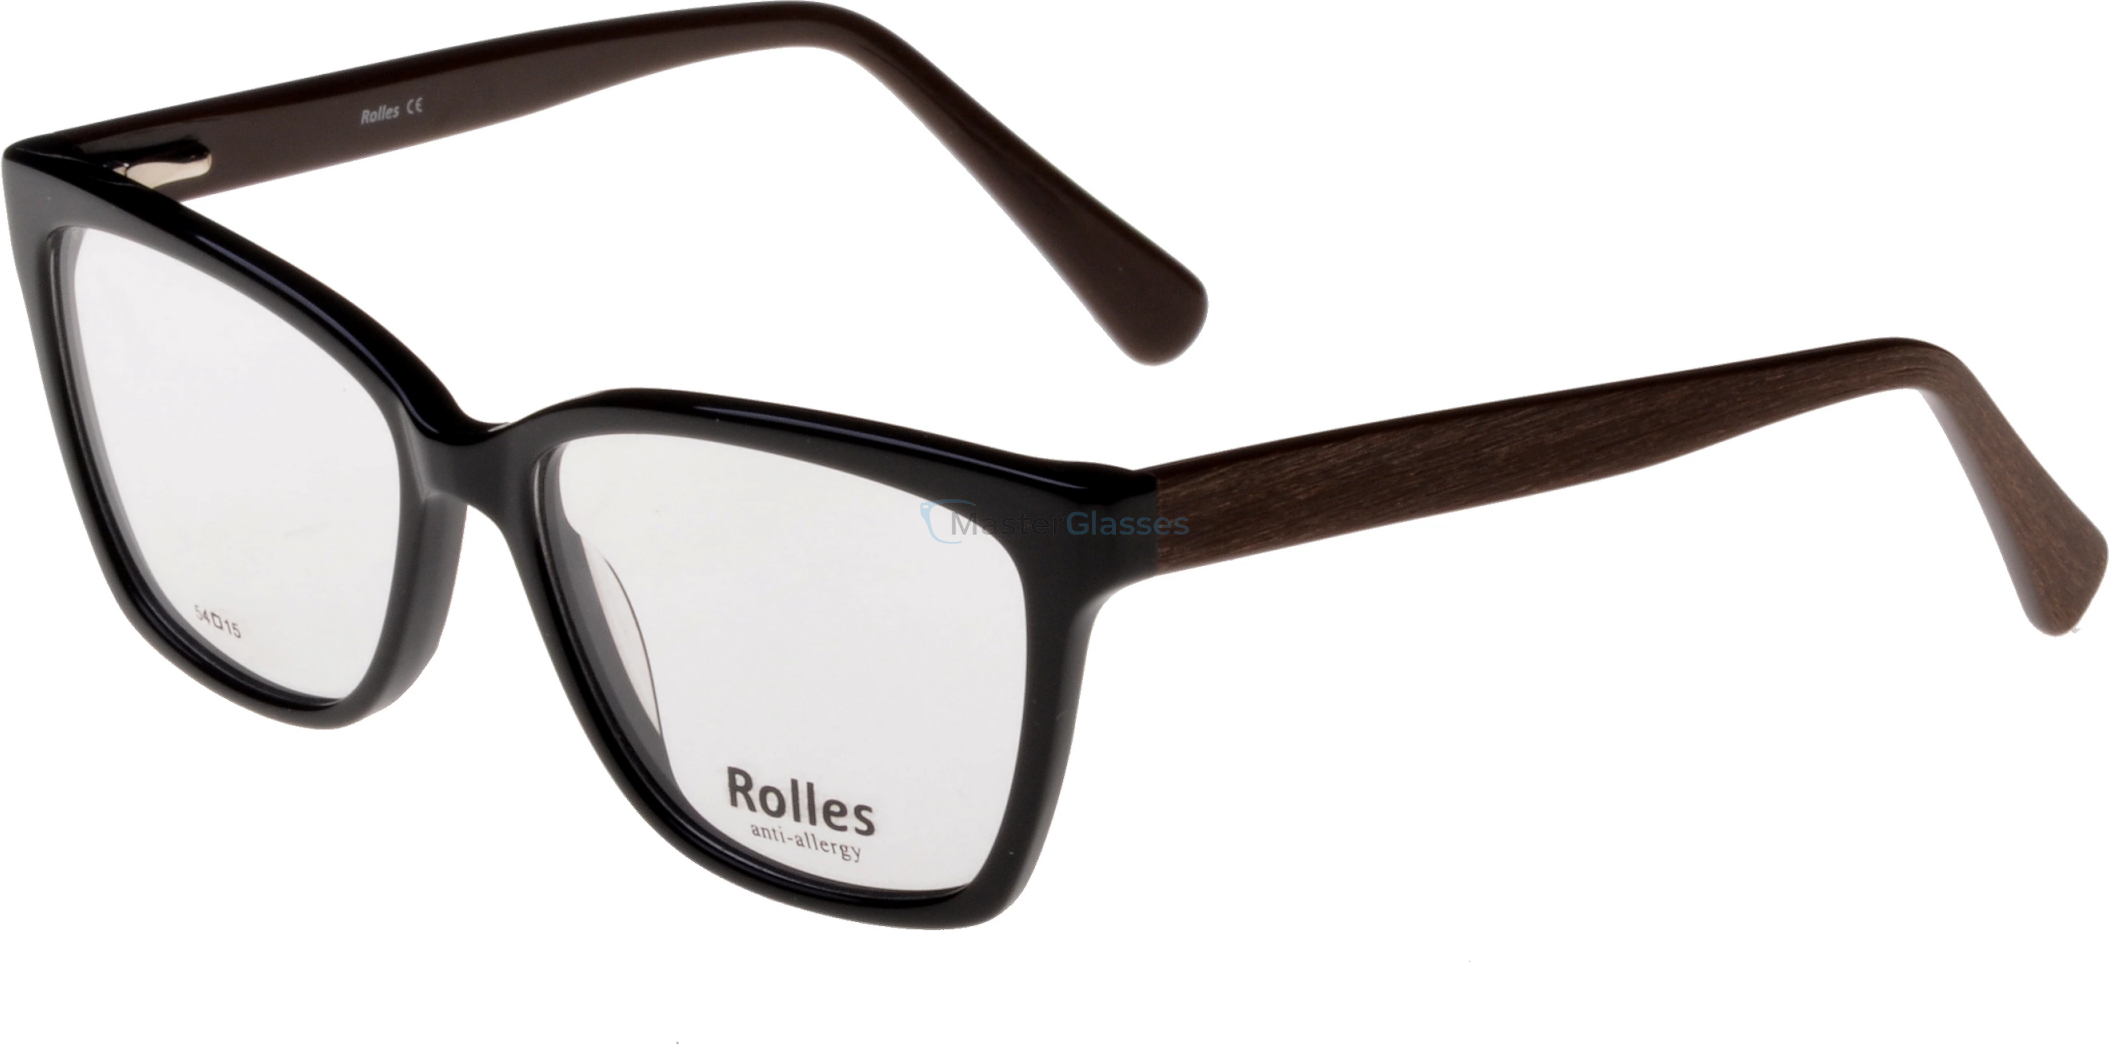  Rolles 412 02